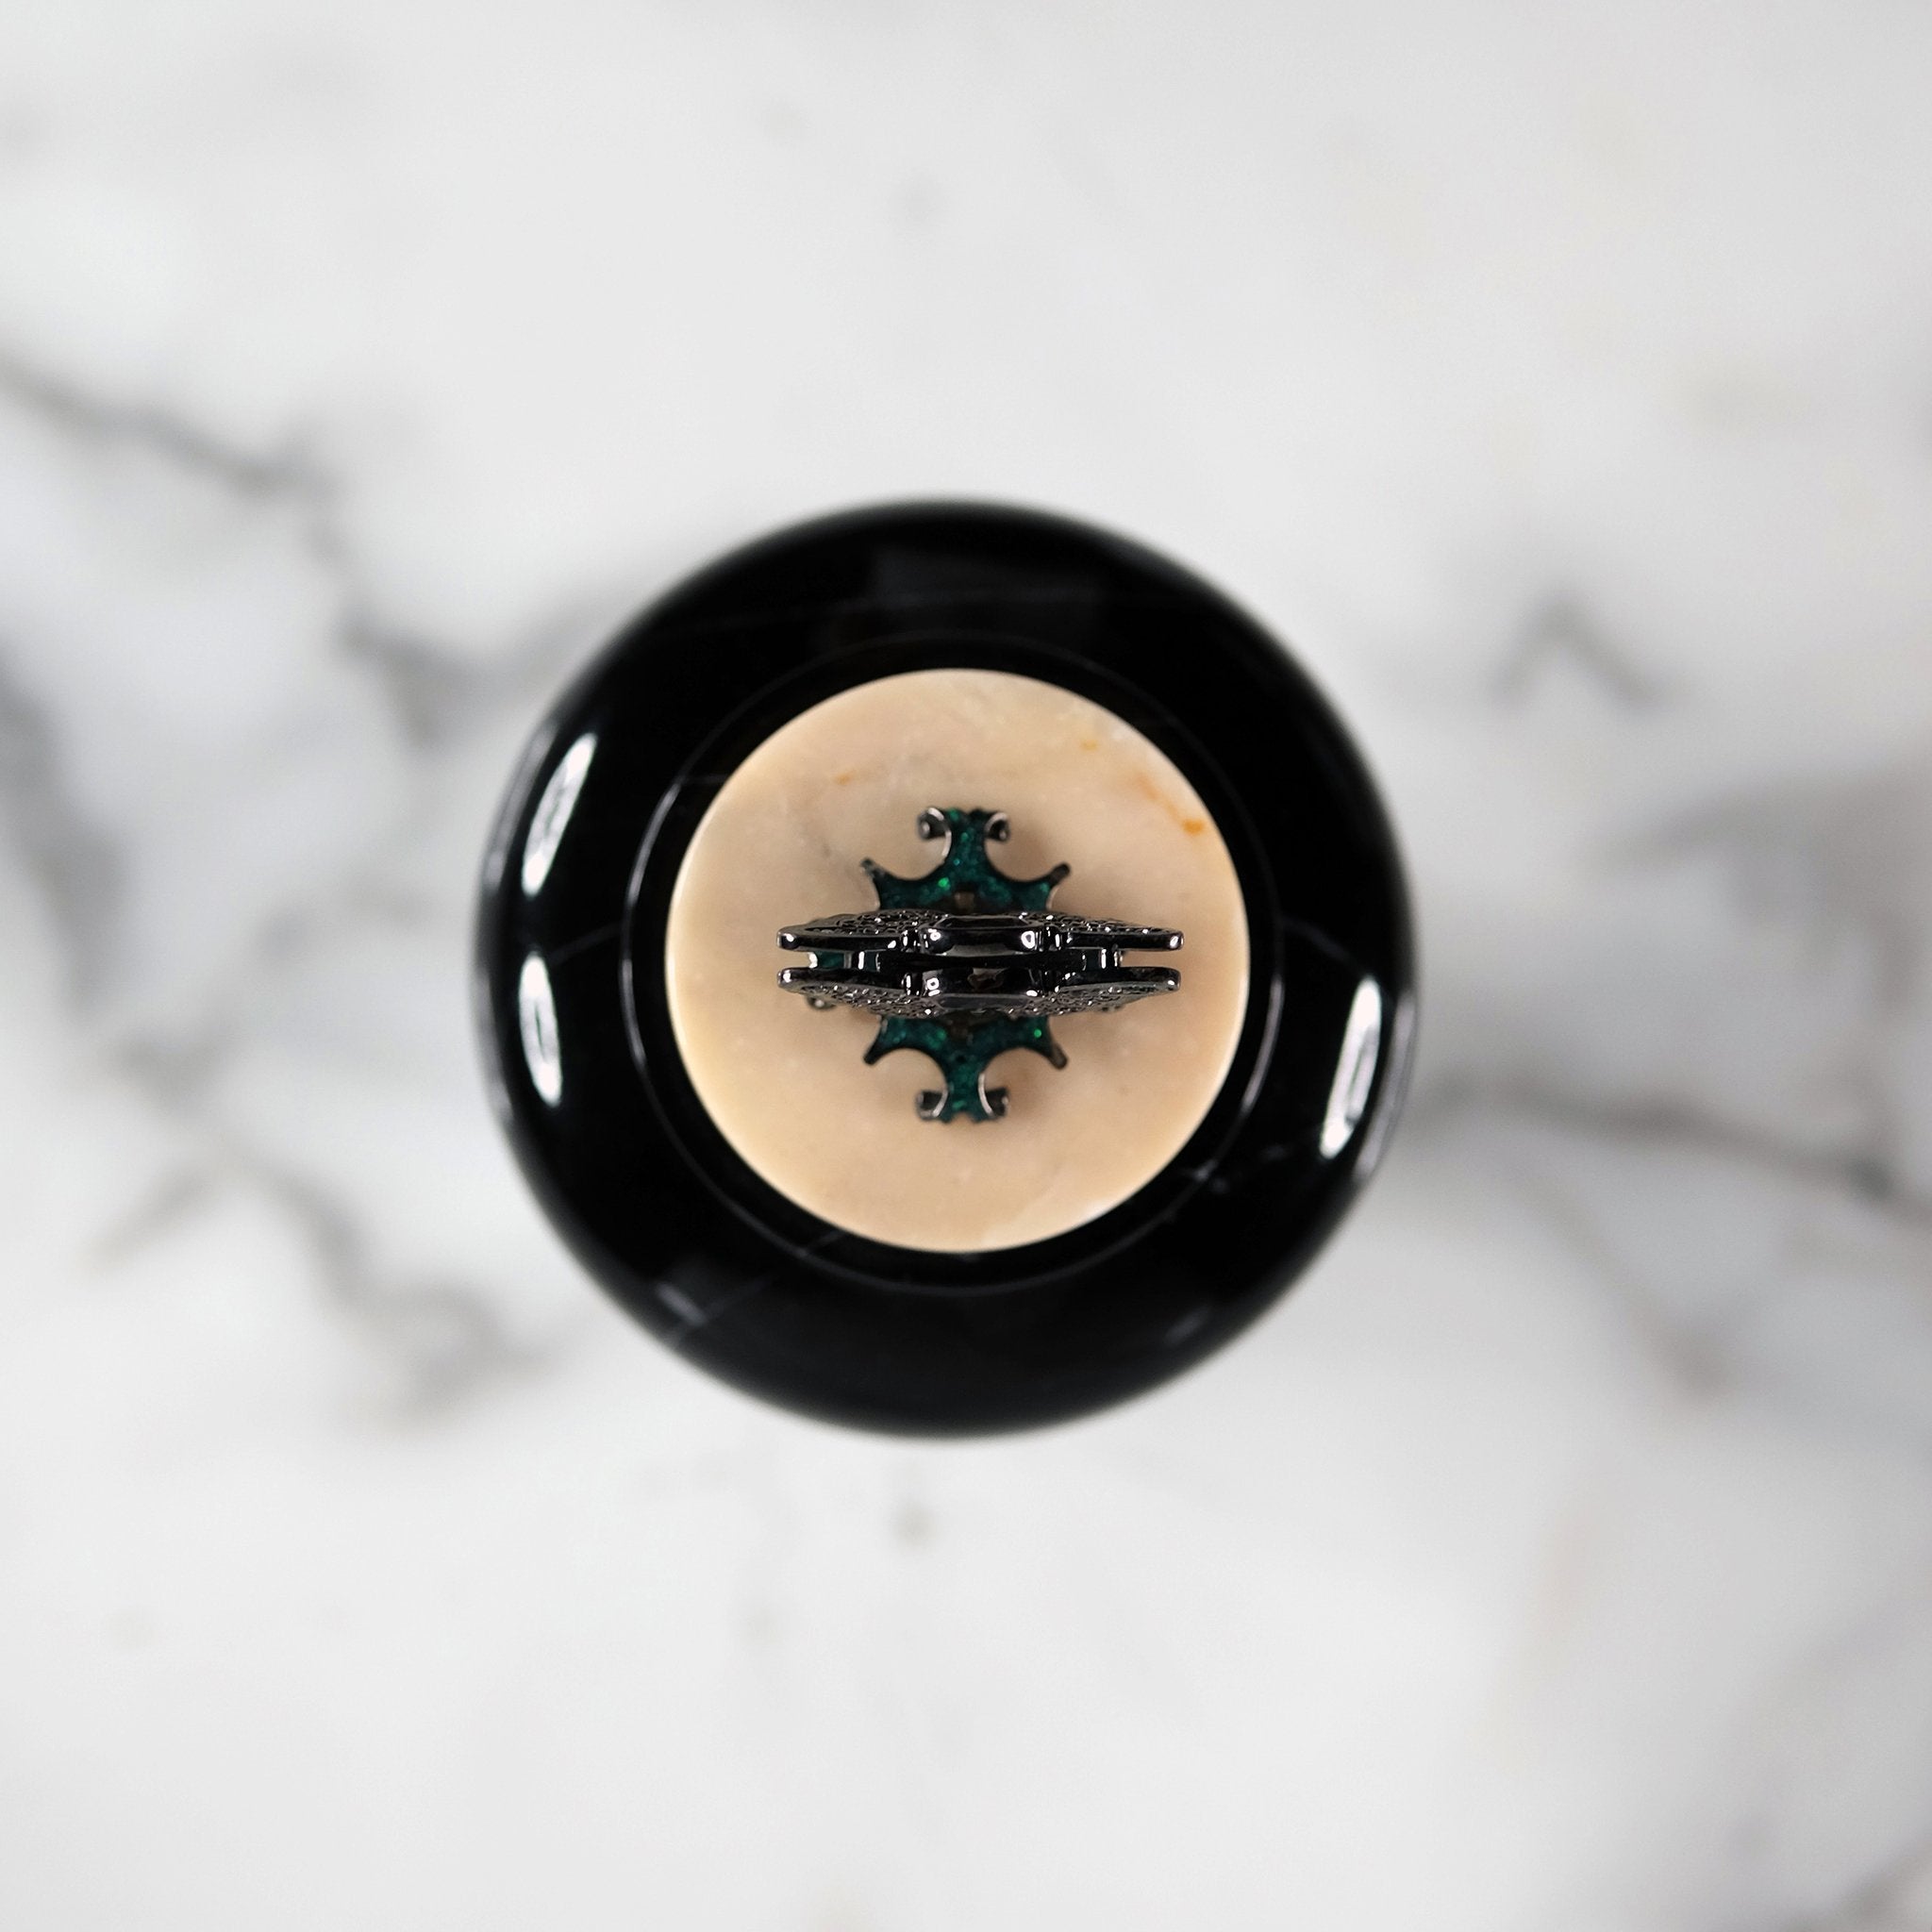 Bicolor Turned Black & Cream Marble Jar, with Green Enamel & Sapphire Butterfly on Lid